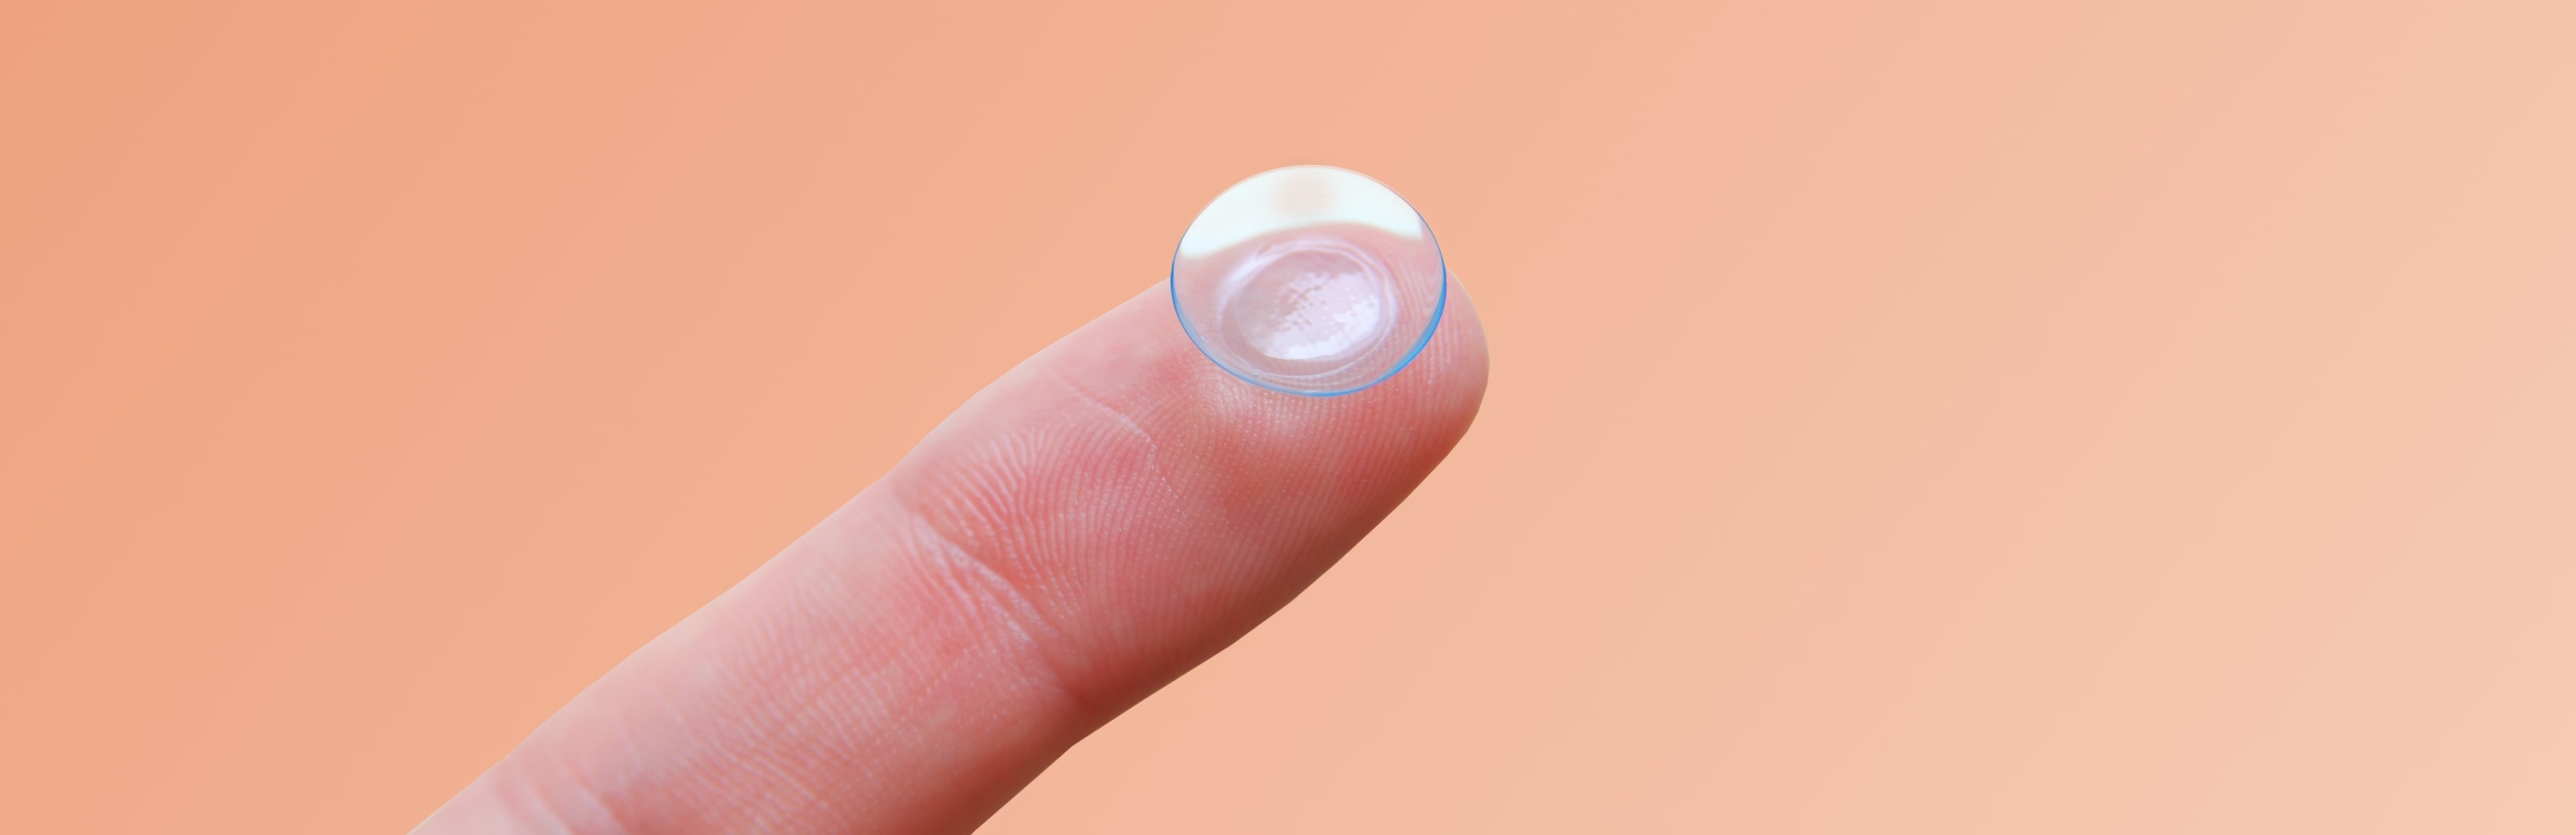 What does a torn contact lens look like and feel like?